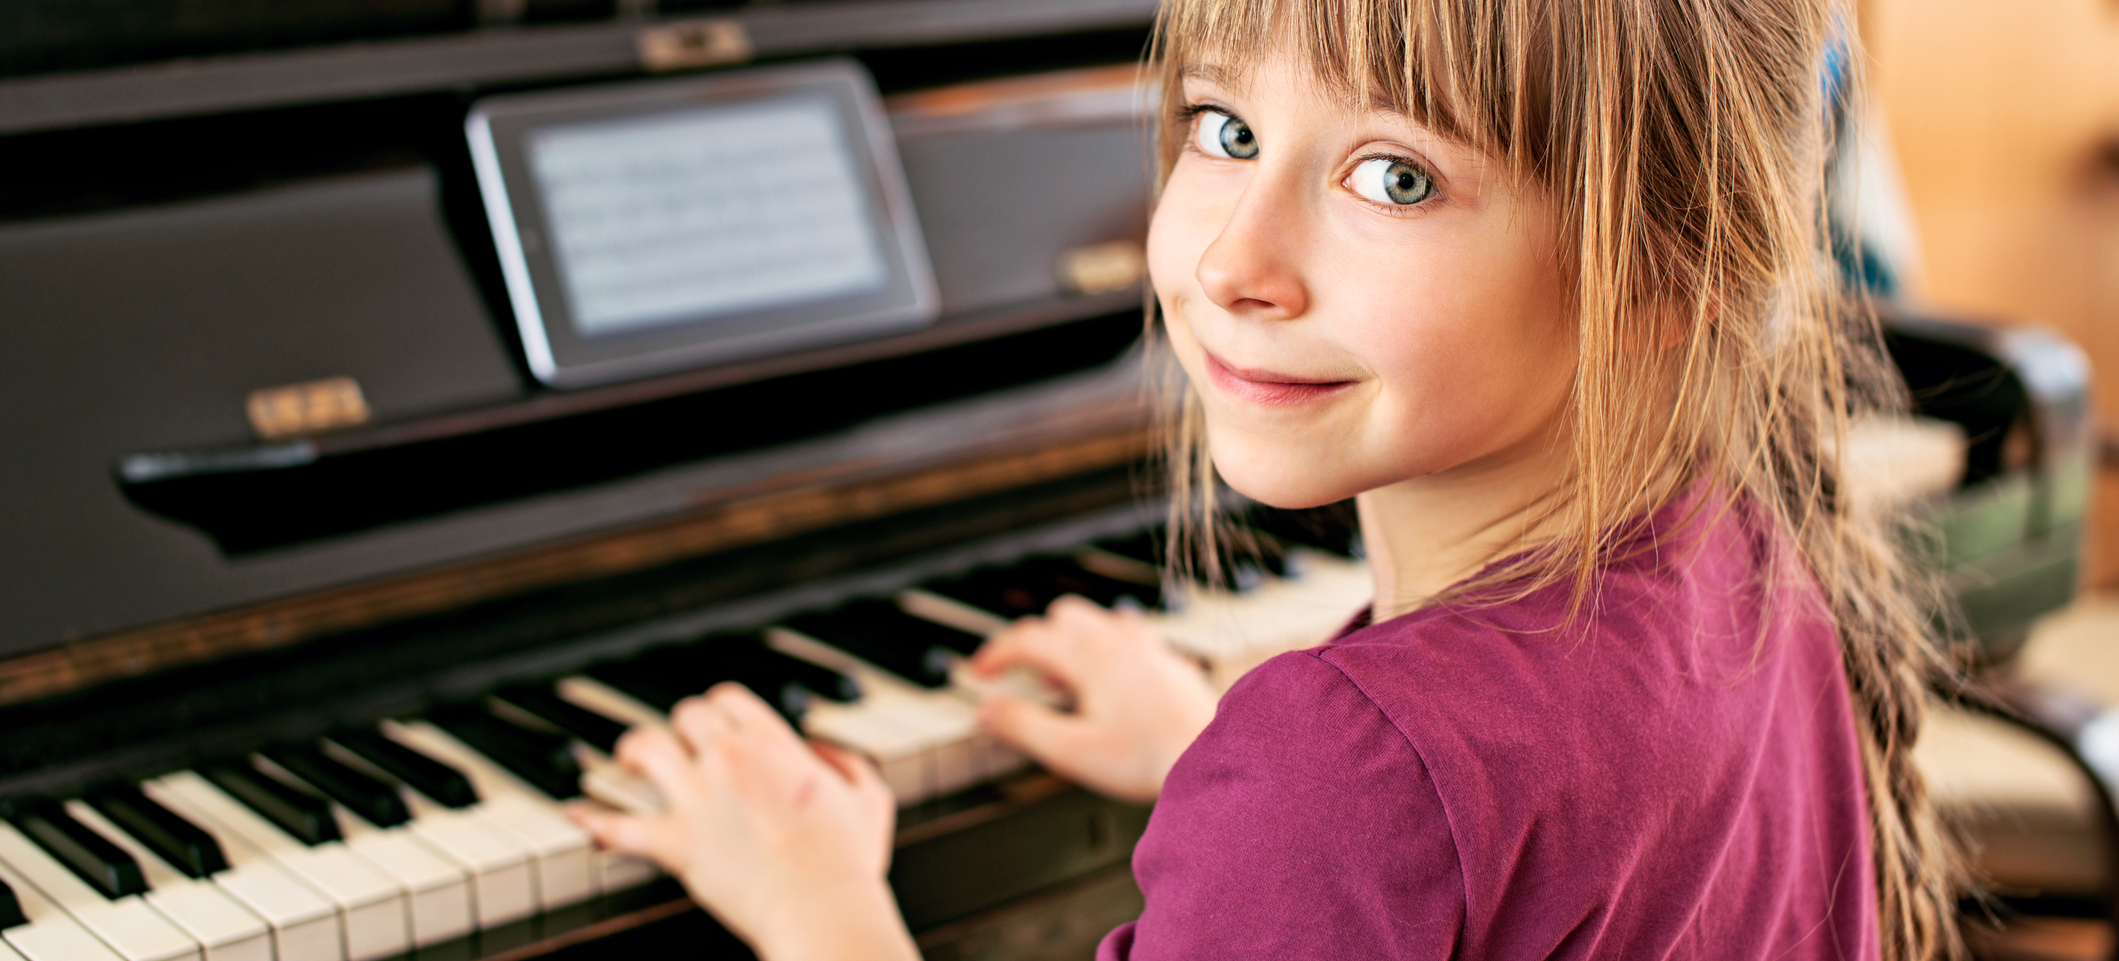 Little-girl-playing-the-piano-172456577_2121x1416-end